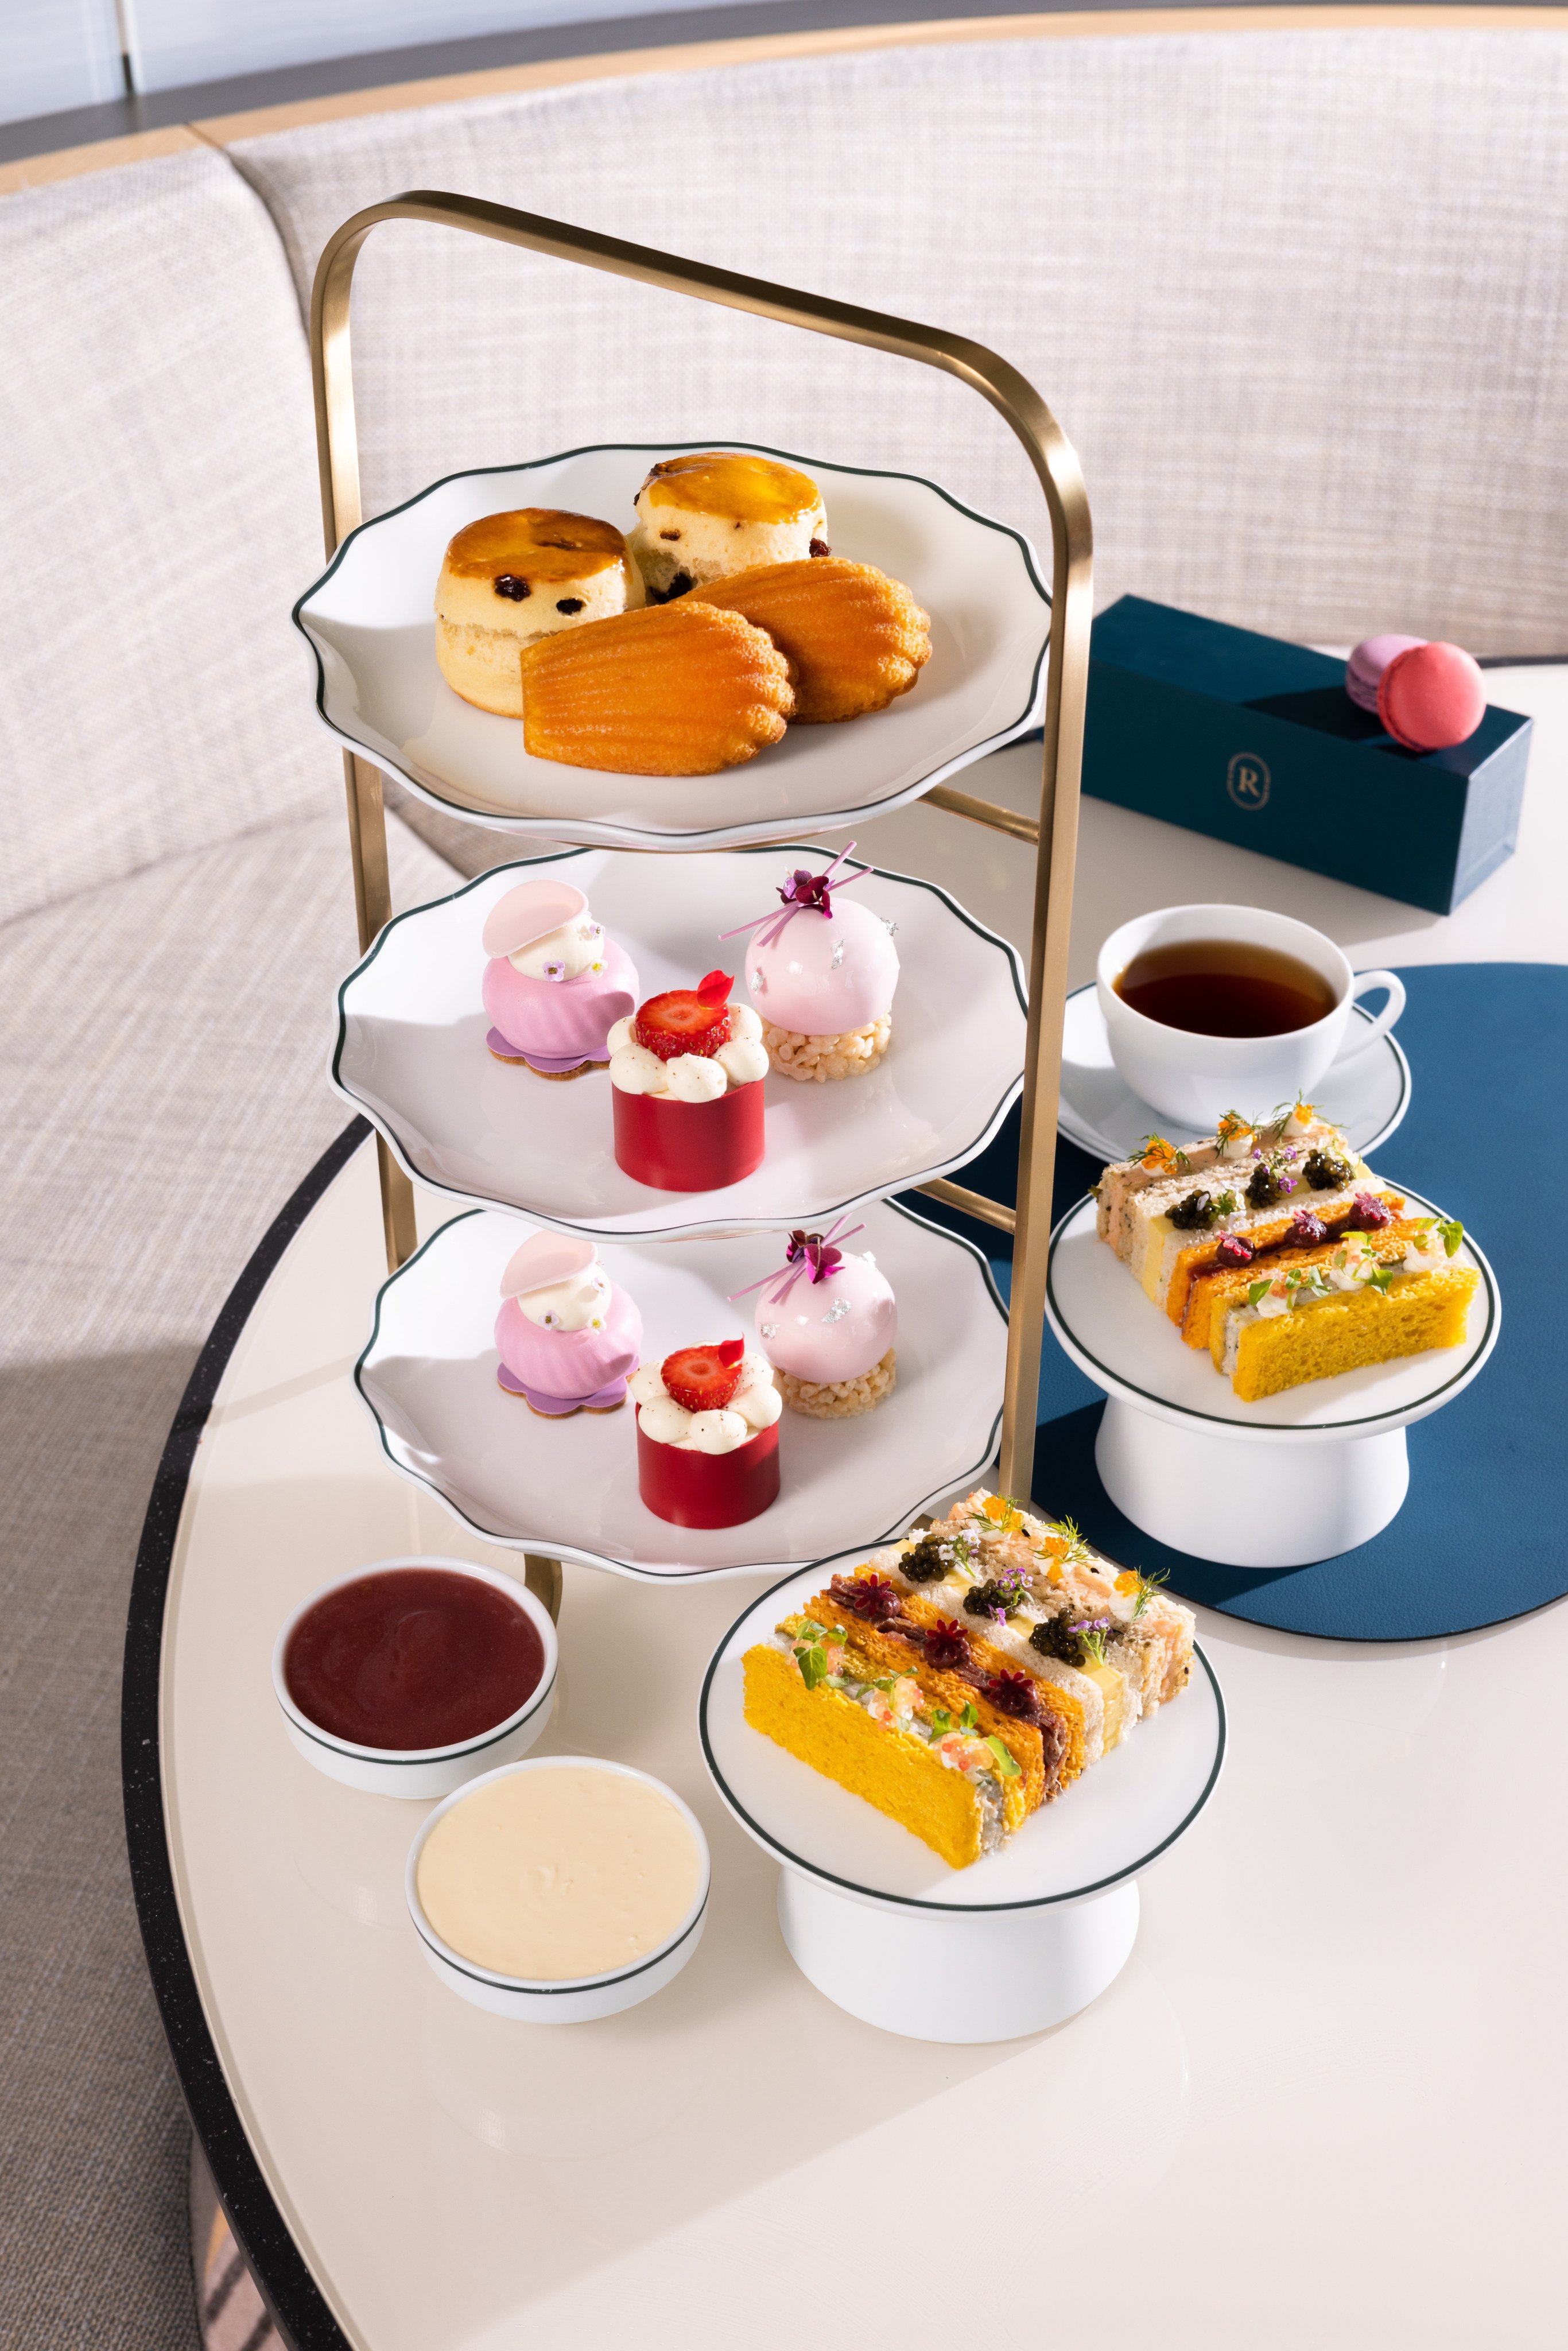 The Regent Hong Kong’s Lobby Lounge is offering a classic afternoon tea, with some special Mother’s Day desserts. Photo: Regent Hong Kong